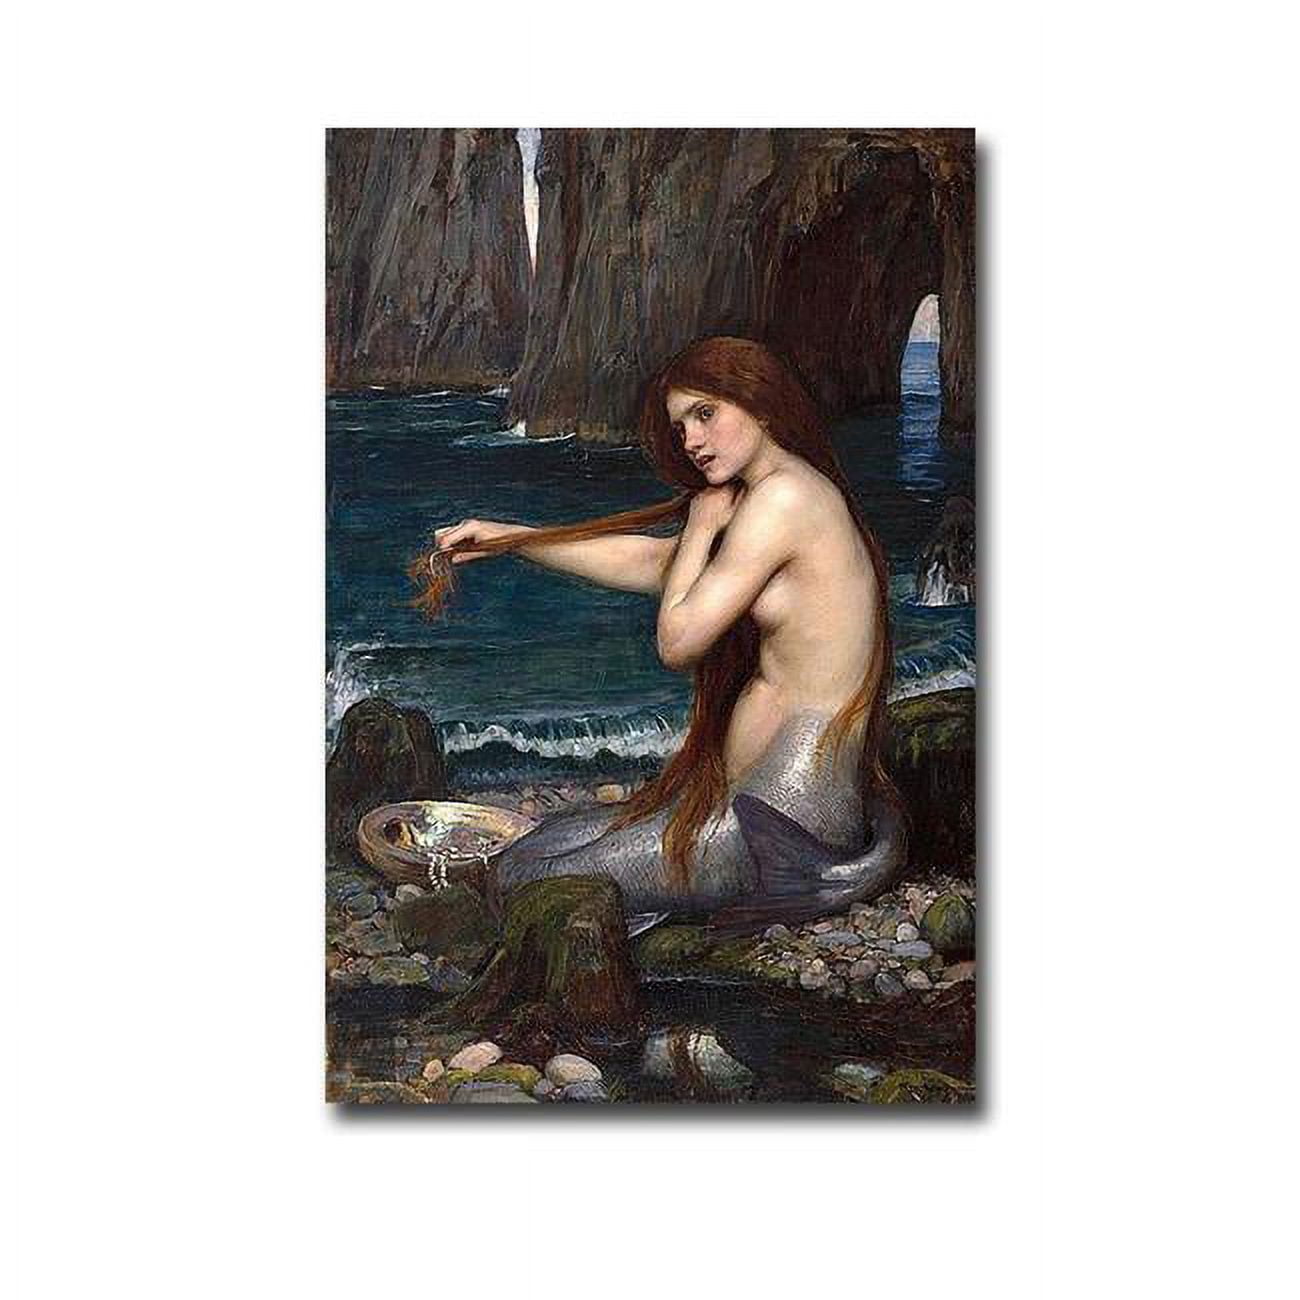 1624x835ig The Mermaid By John Waterhouse Premium Gallery-wrapped Canvas Giclee Art - 16 X 24 X 1.5 In.